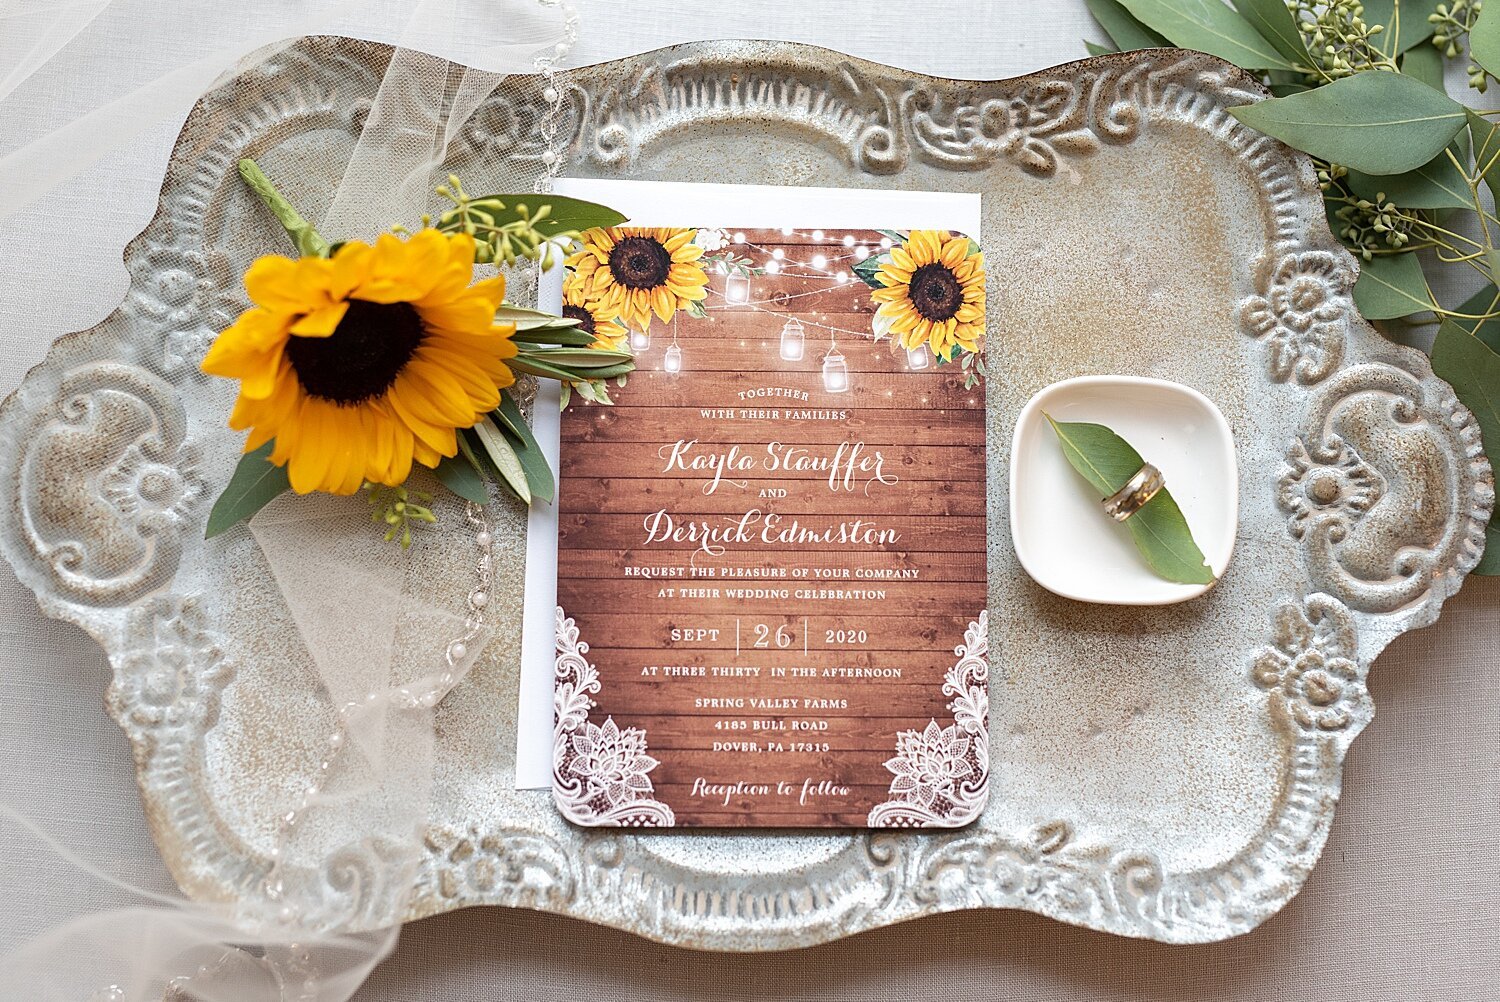 Invitation Suite details Spring Valley Farm Dover PA